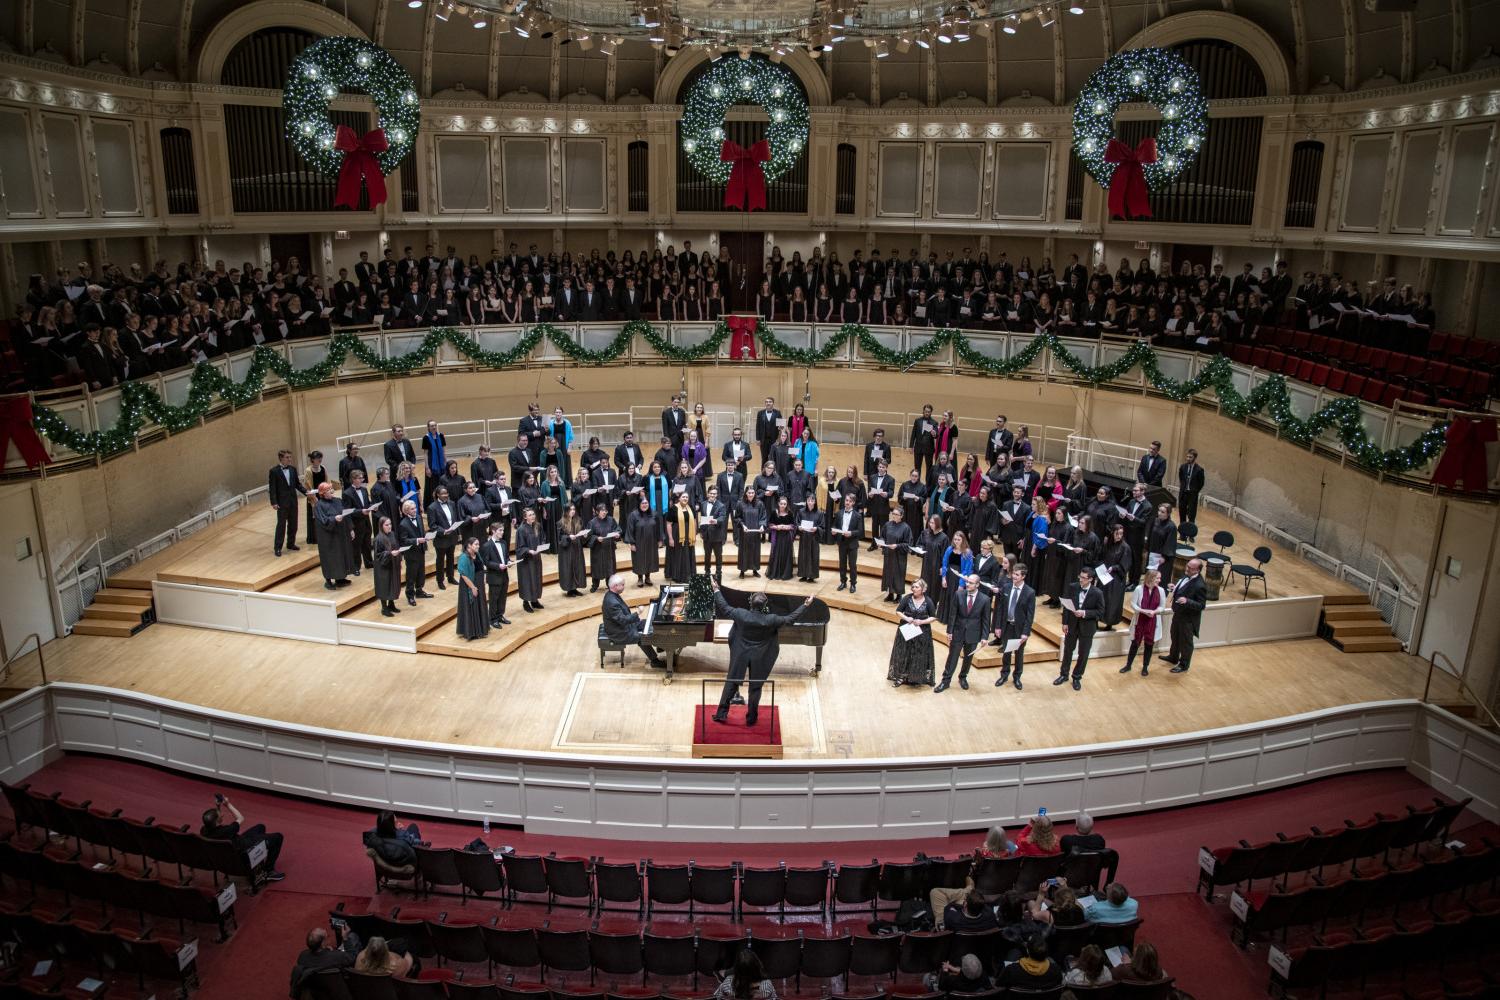 The <a href='http://qlvm.uncsj.com'>bv伟德ios下载</a> Choir performs in the Chicago Symphony Hall.